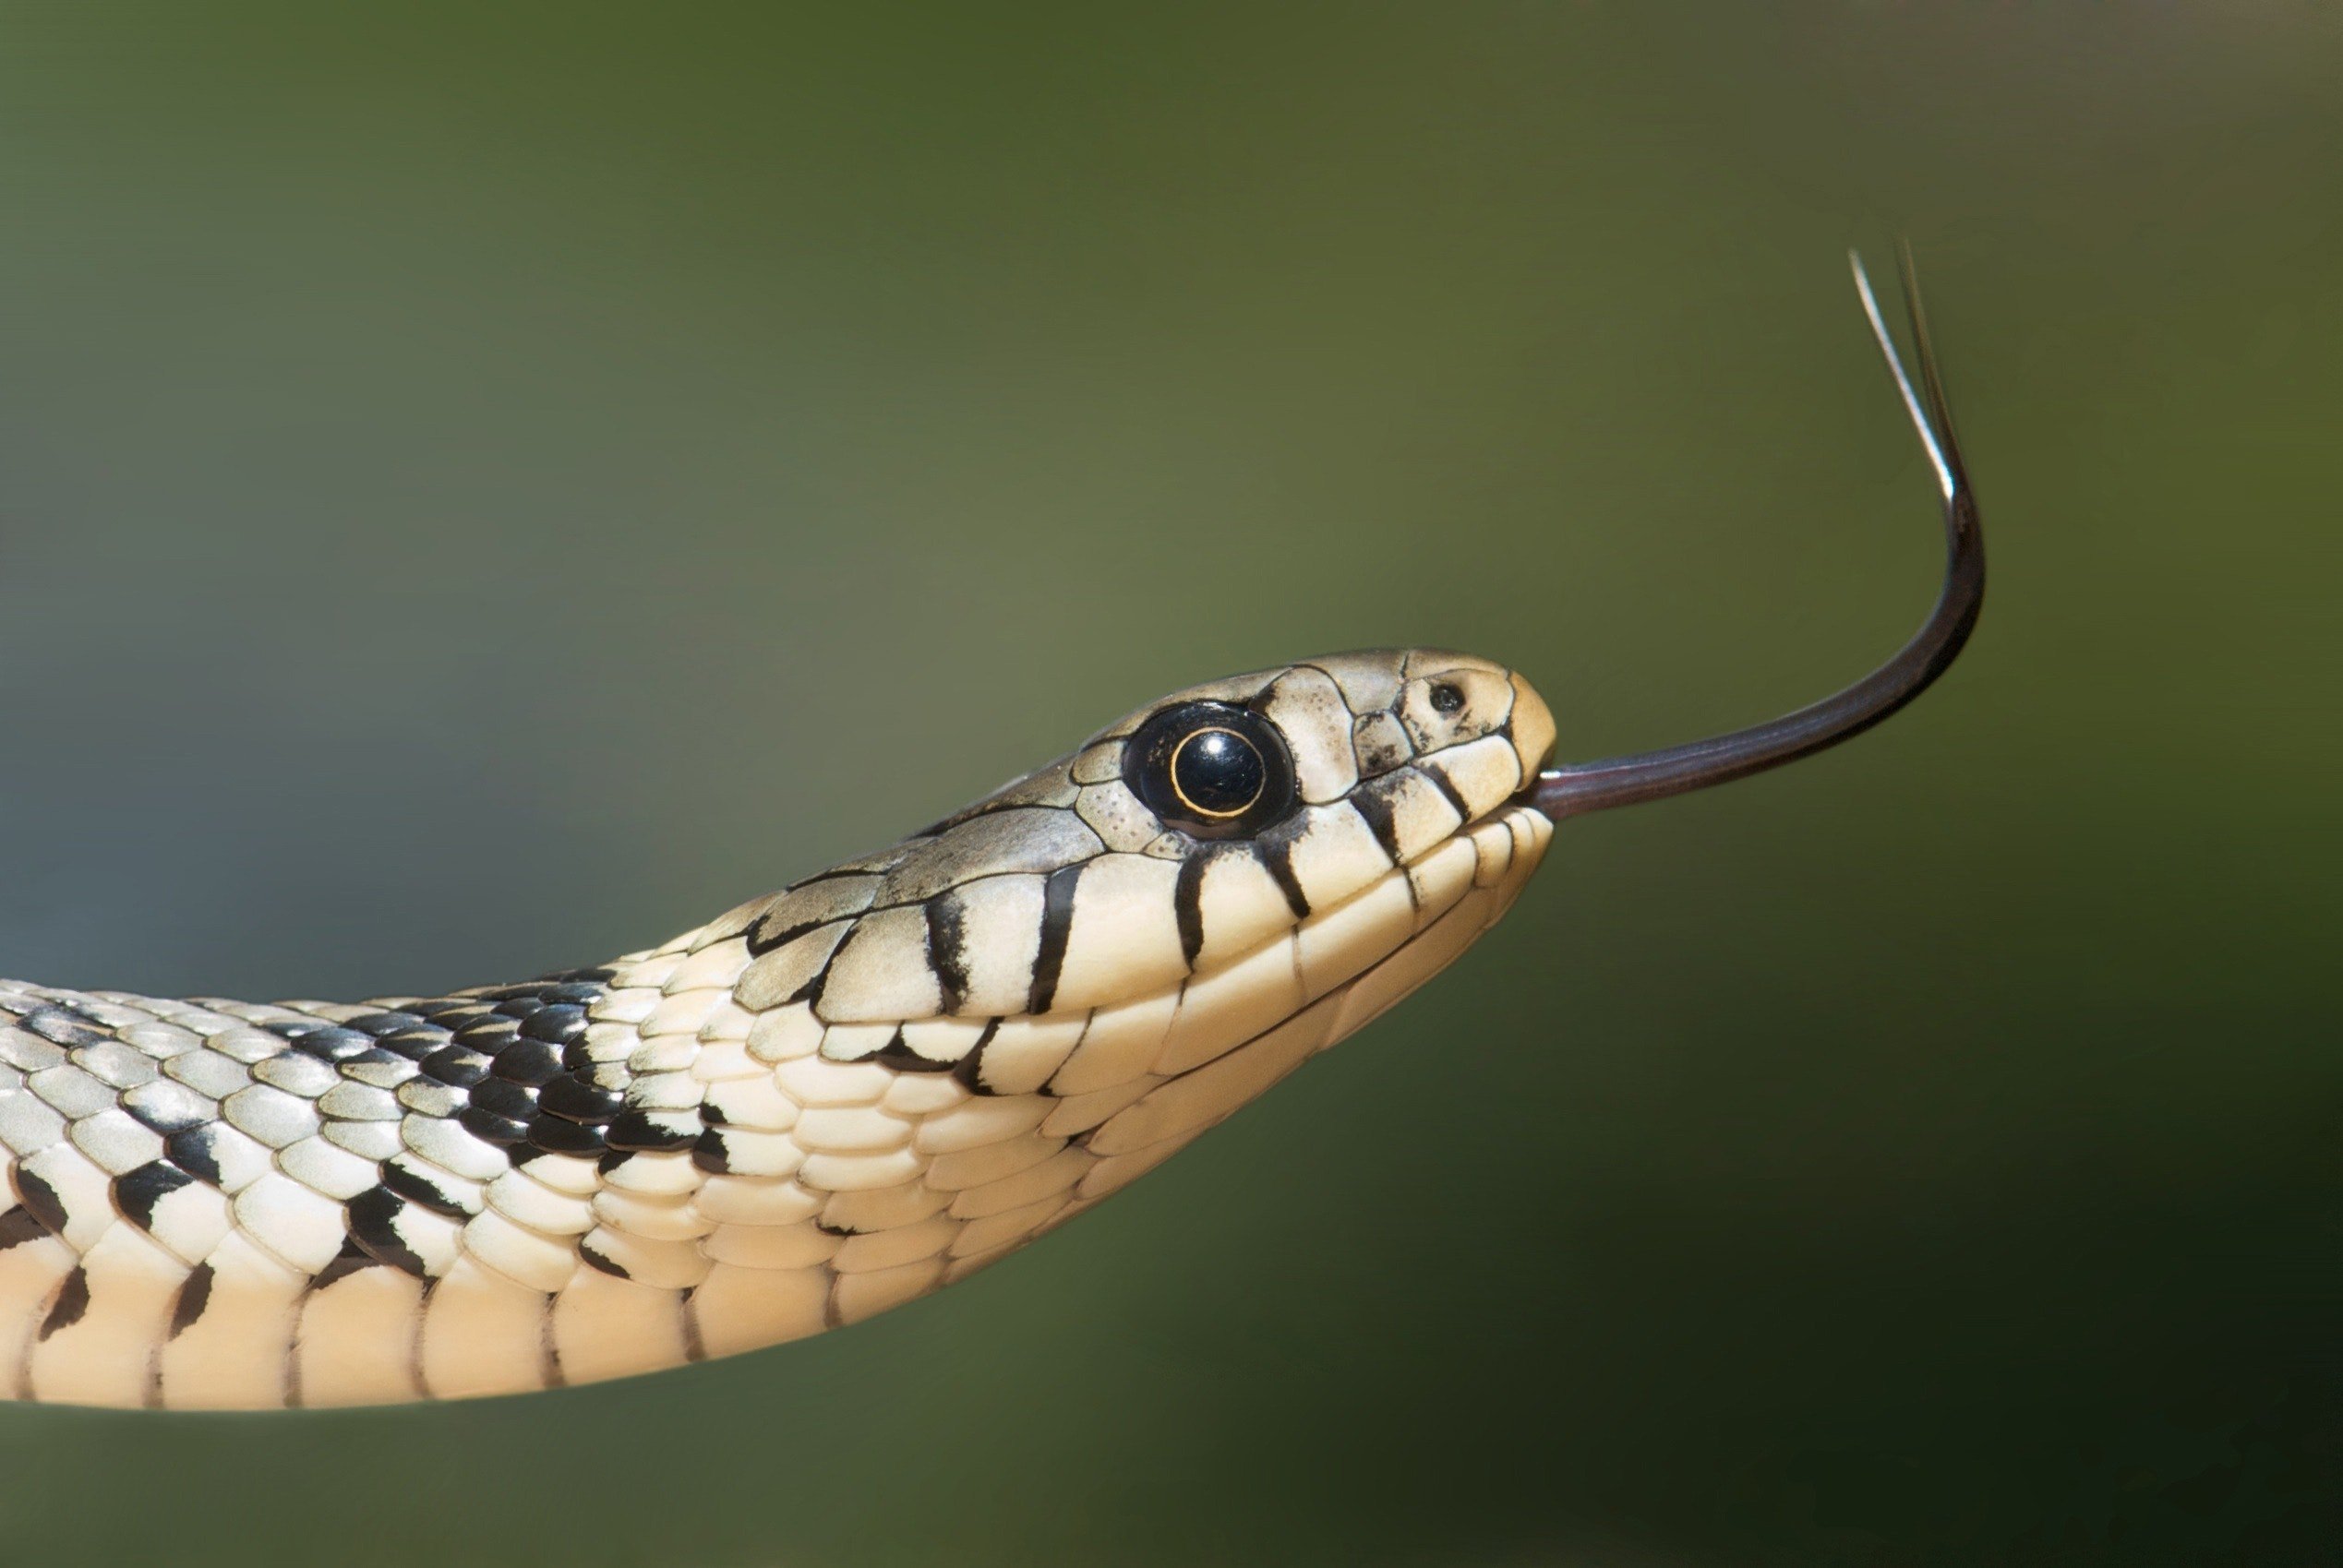 A snake slithering through the woods. | Photo: Pexels